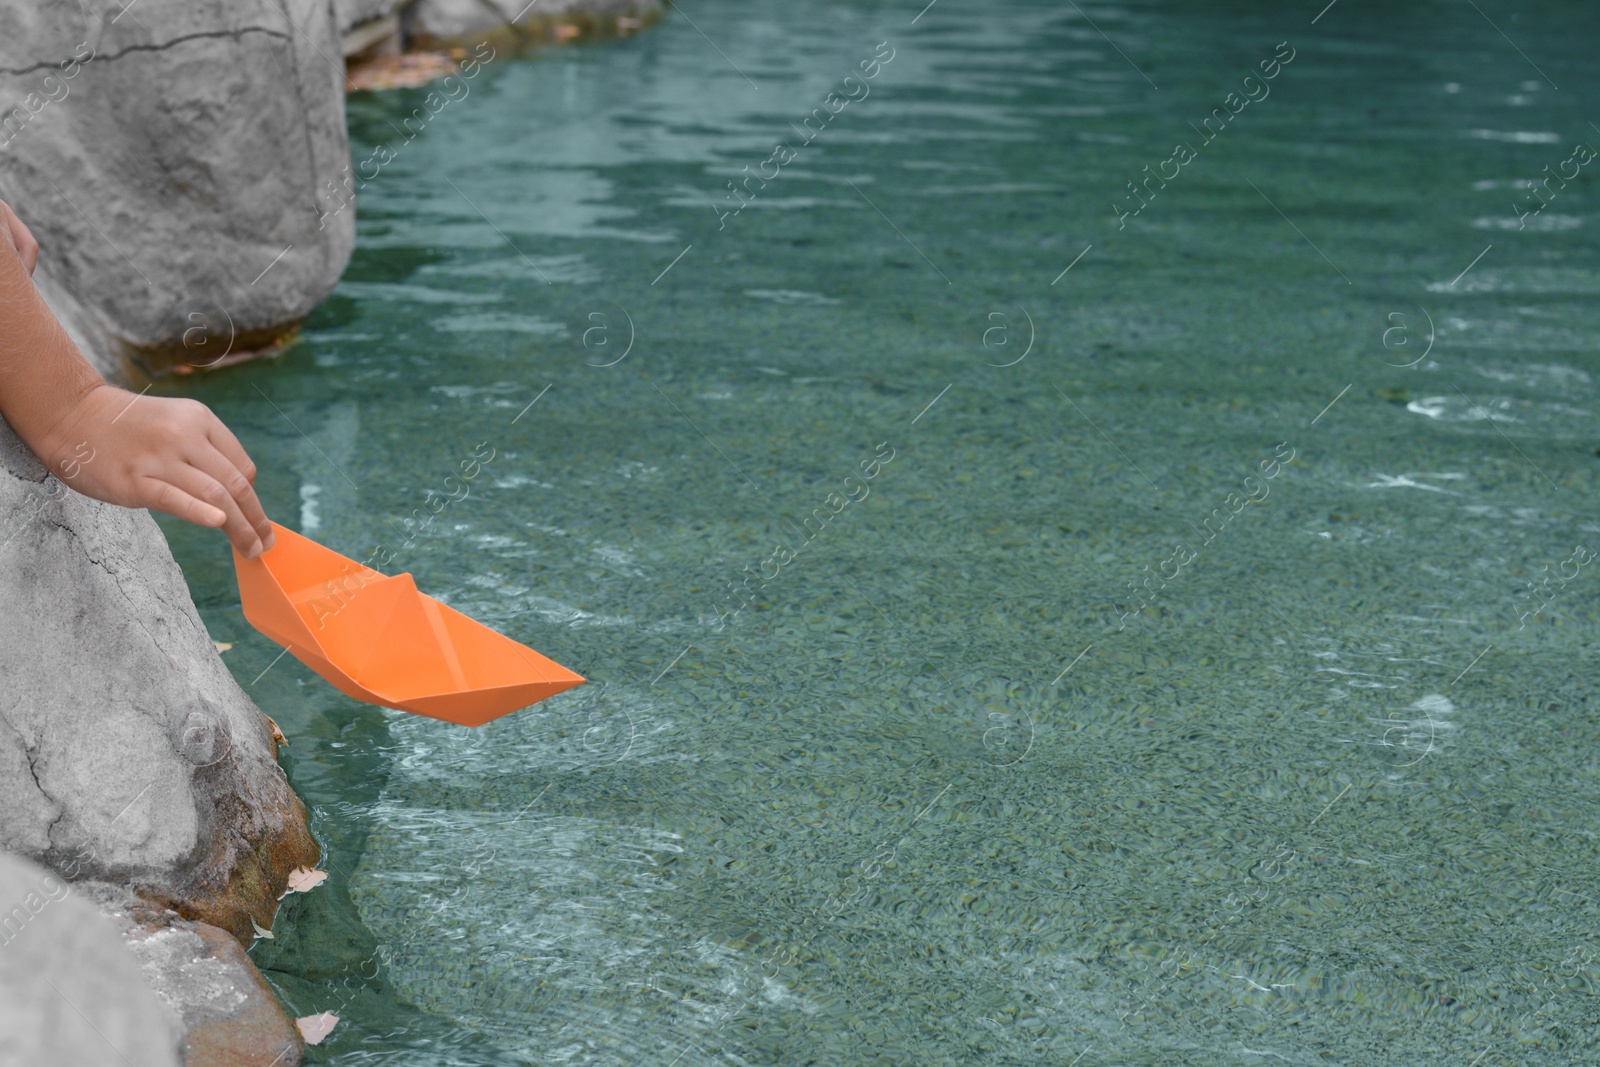 Photo of Kid launching small orange paper boat on water outdoors, closeup. Space for text